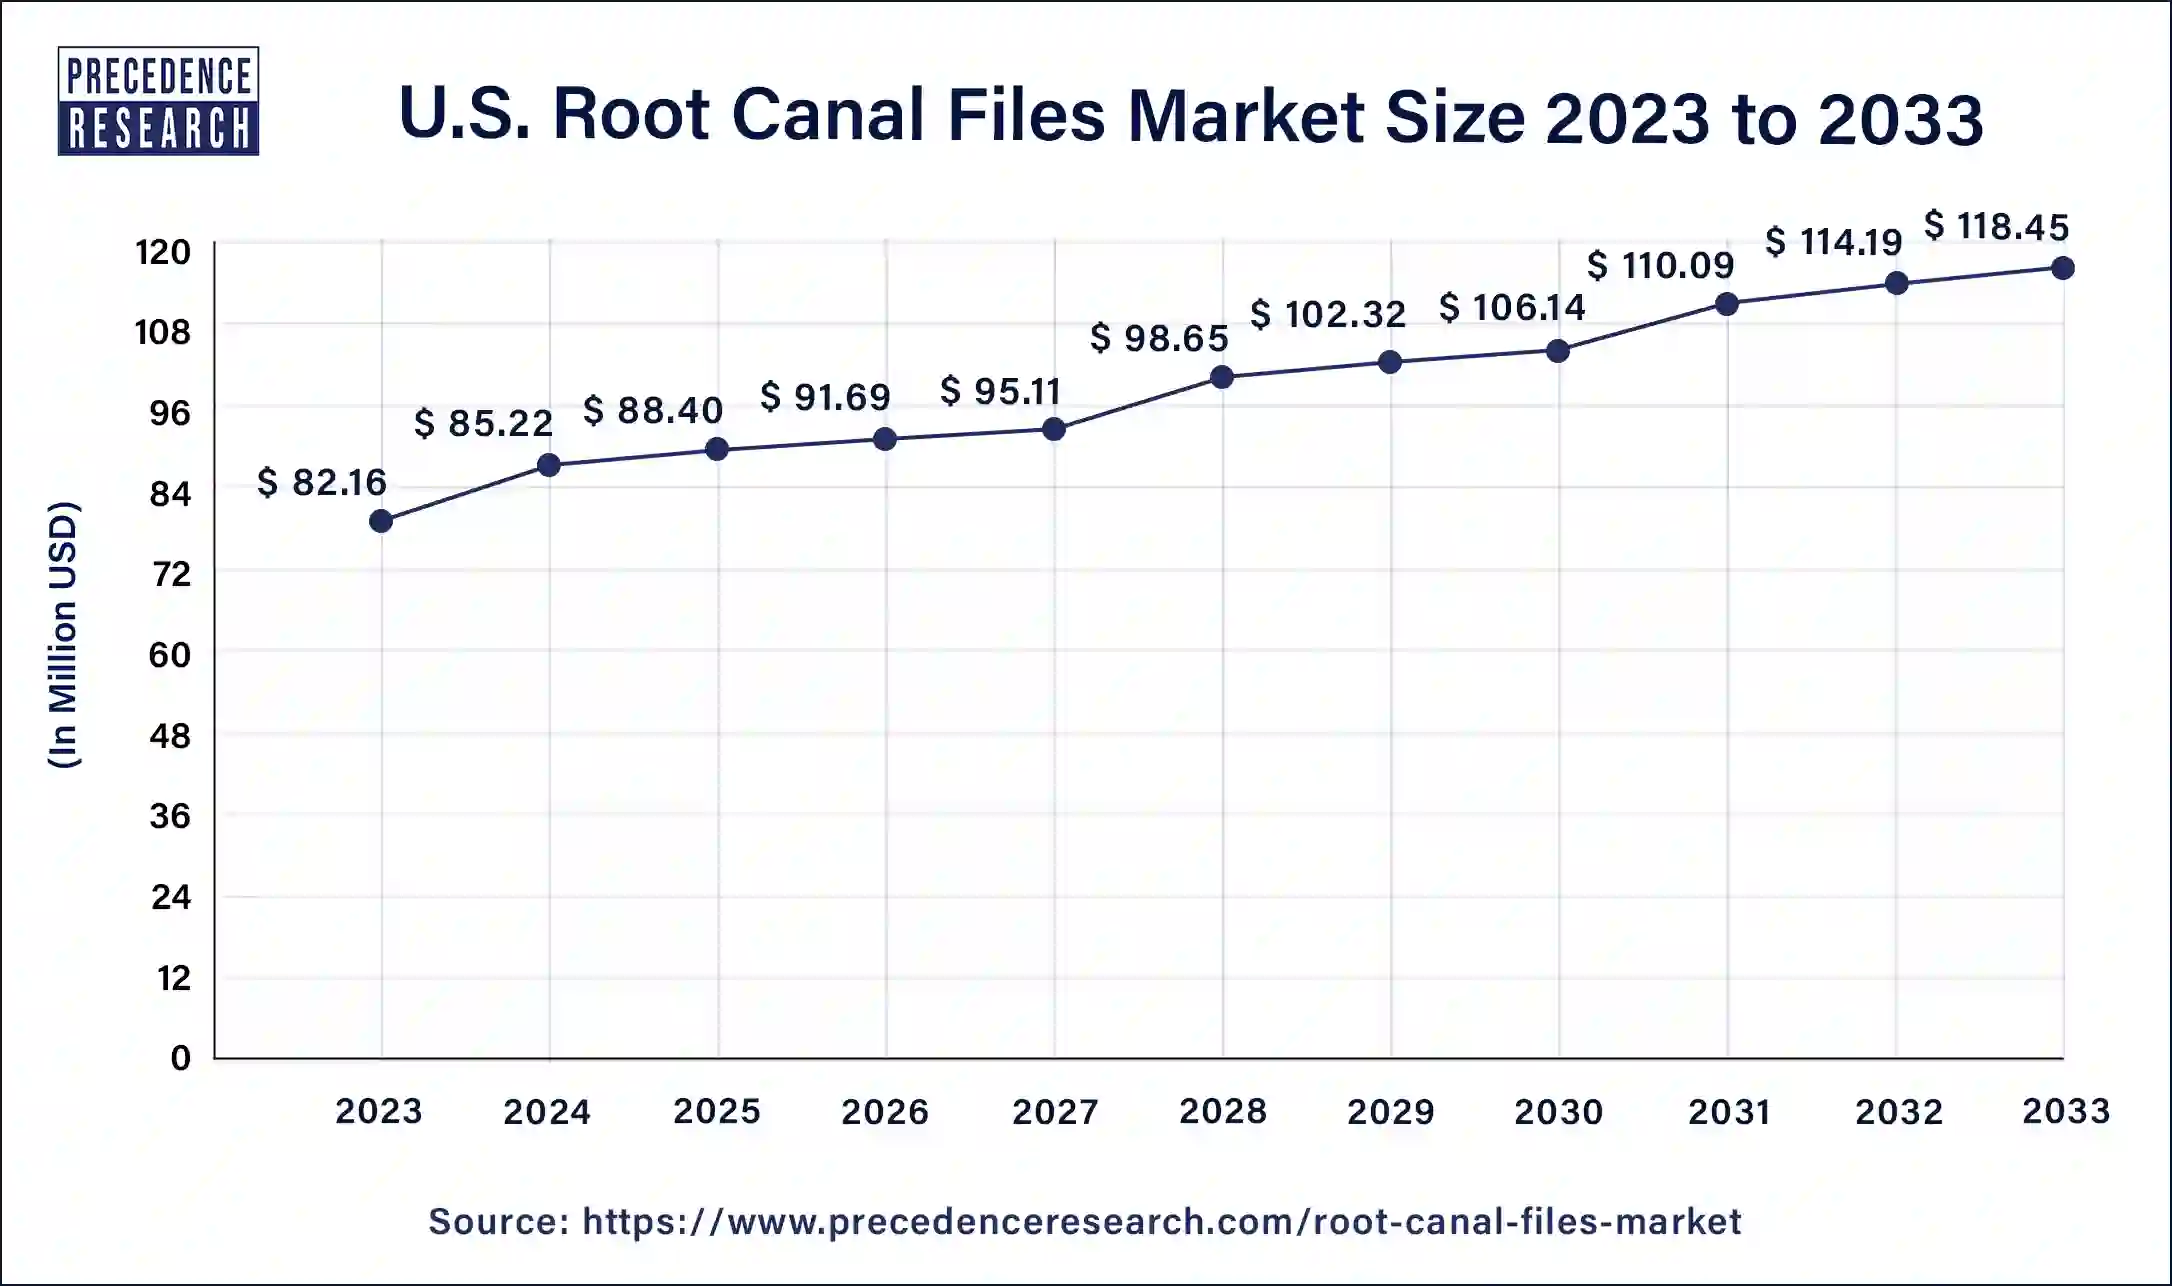 U.S. Root Canal Files Market Size 2024 to 2033